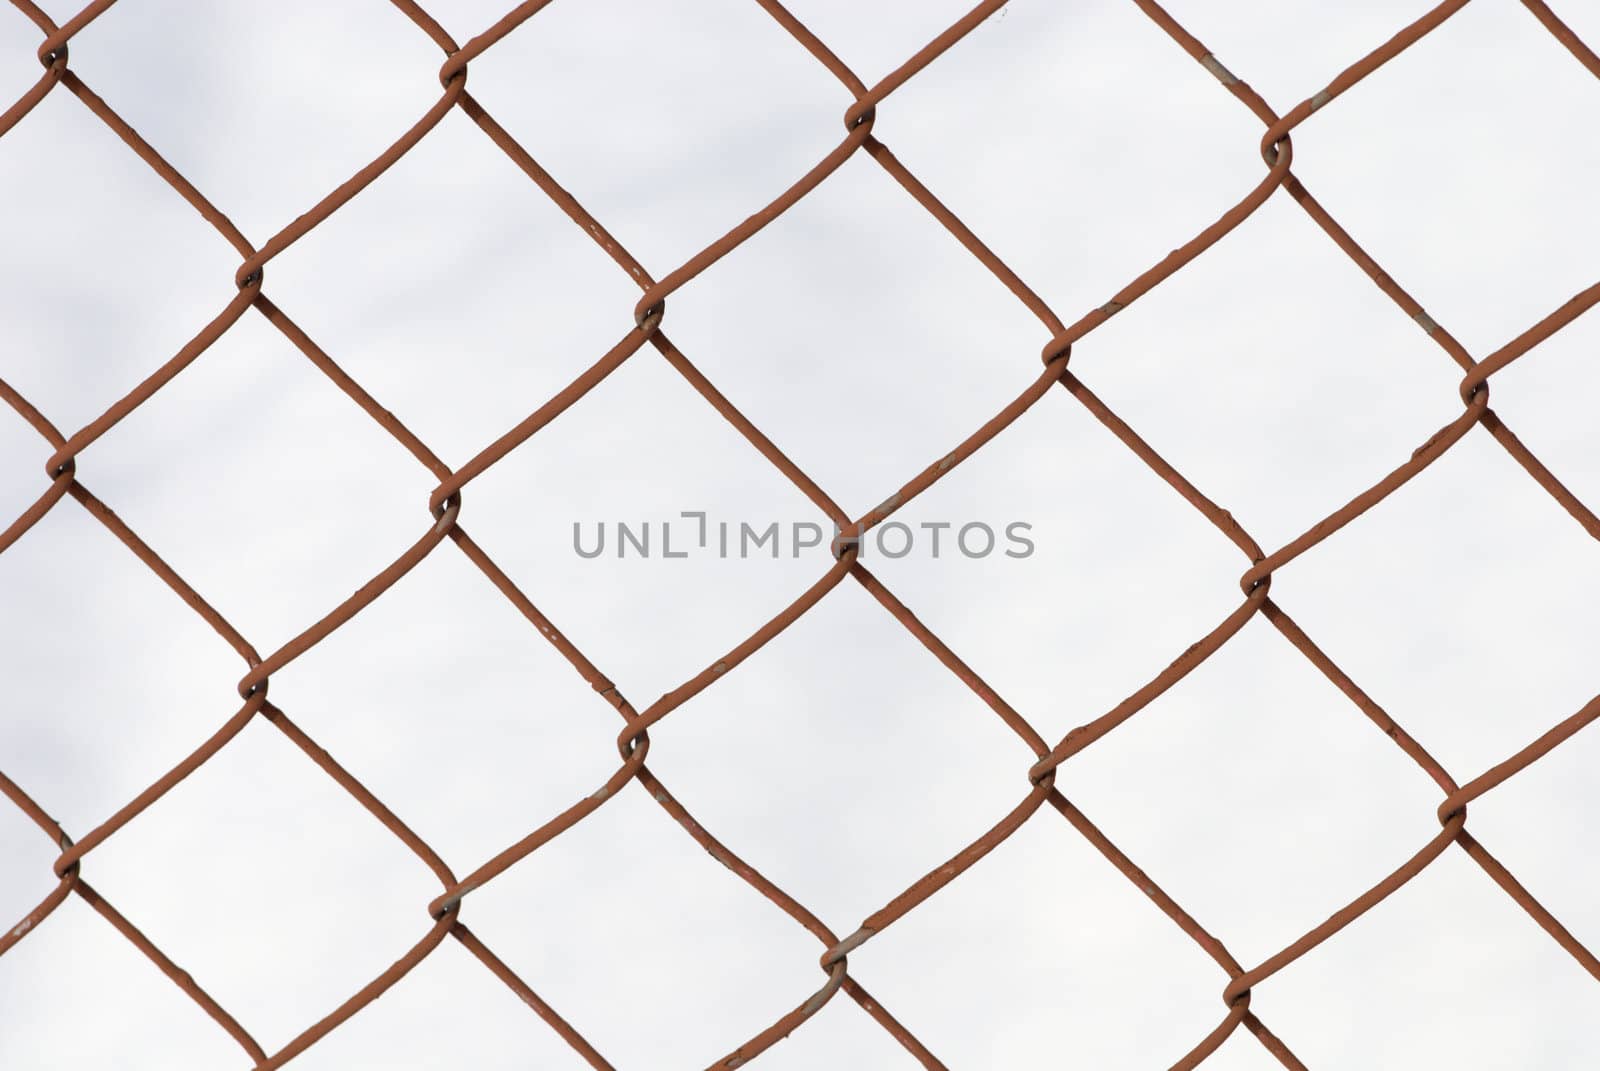 Knotted grid like chain-link fence against cloudy sky